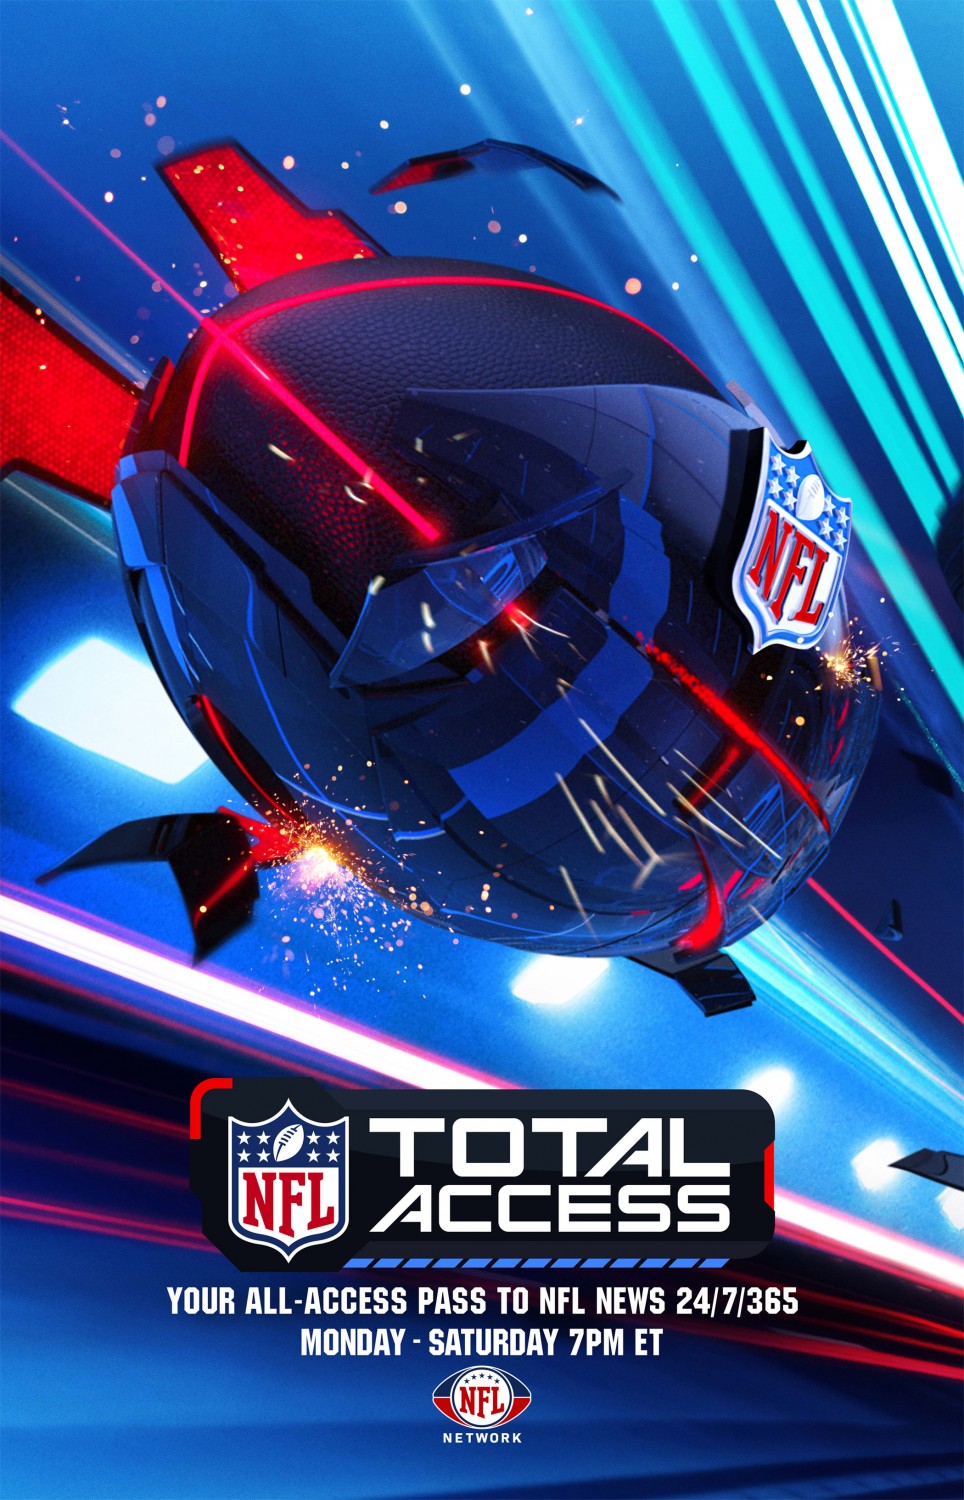 Extra Large TV Poster Image for NFL Total Access 